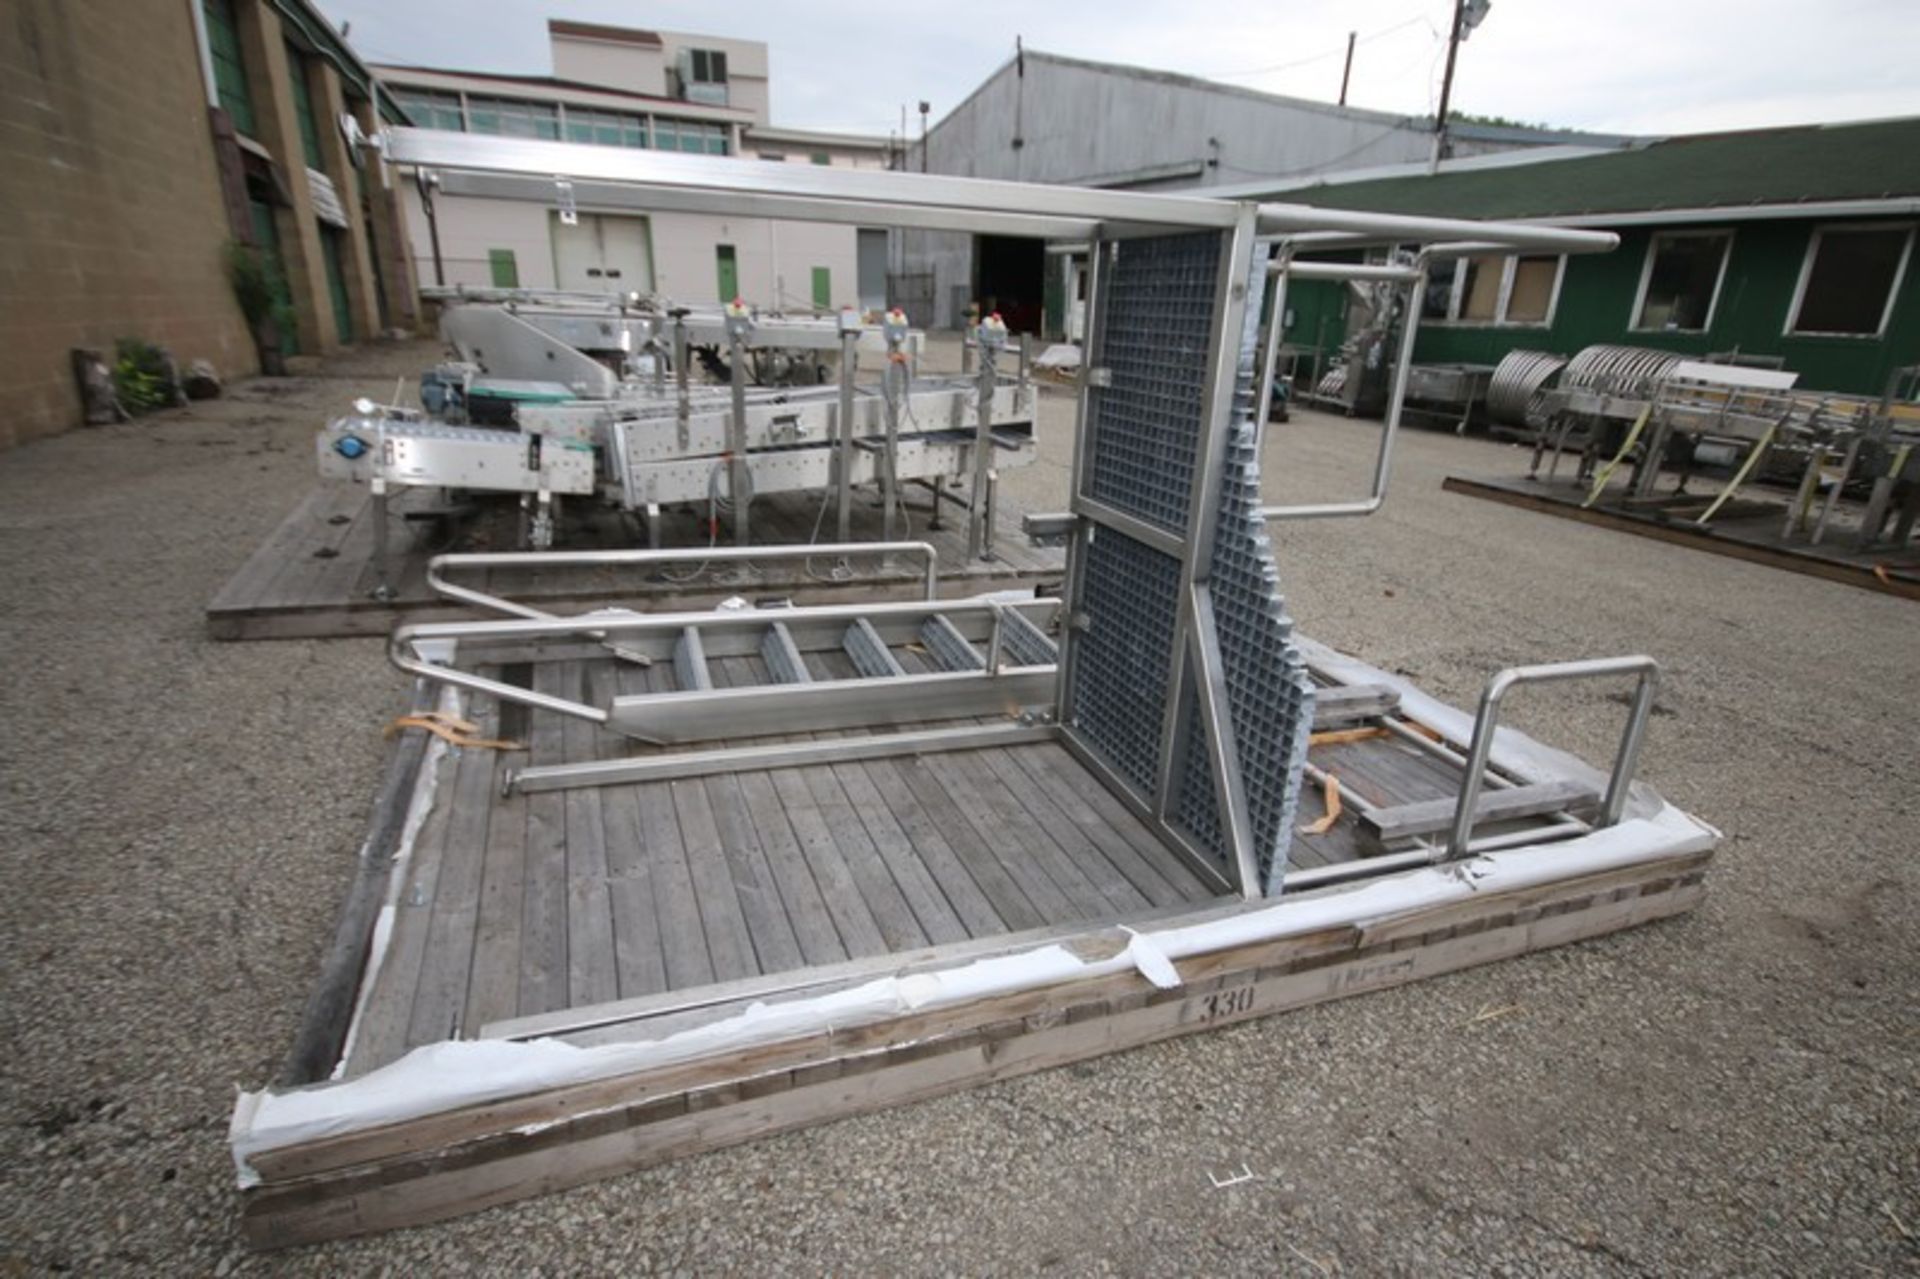 Aprox. 5' L x 42" W x 65" H S/S Tank Operator's Platform with Safety Rail, Plastic Grating, Includes - Image 3 of 4